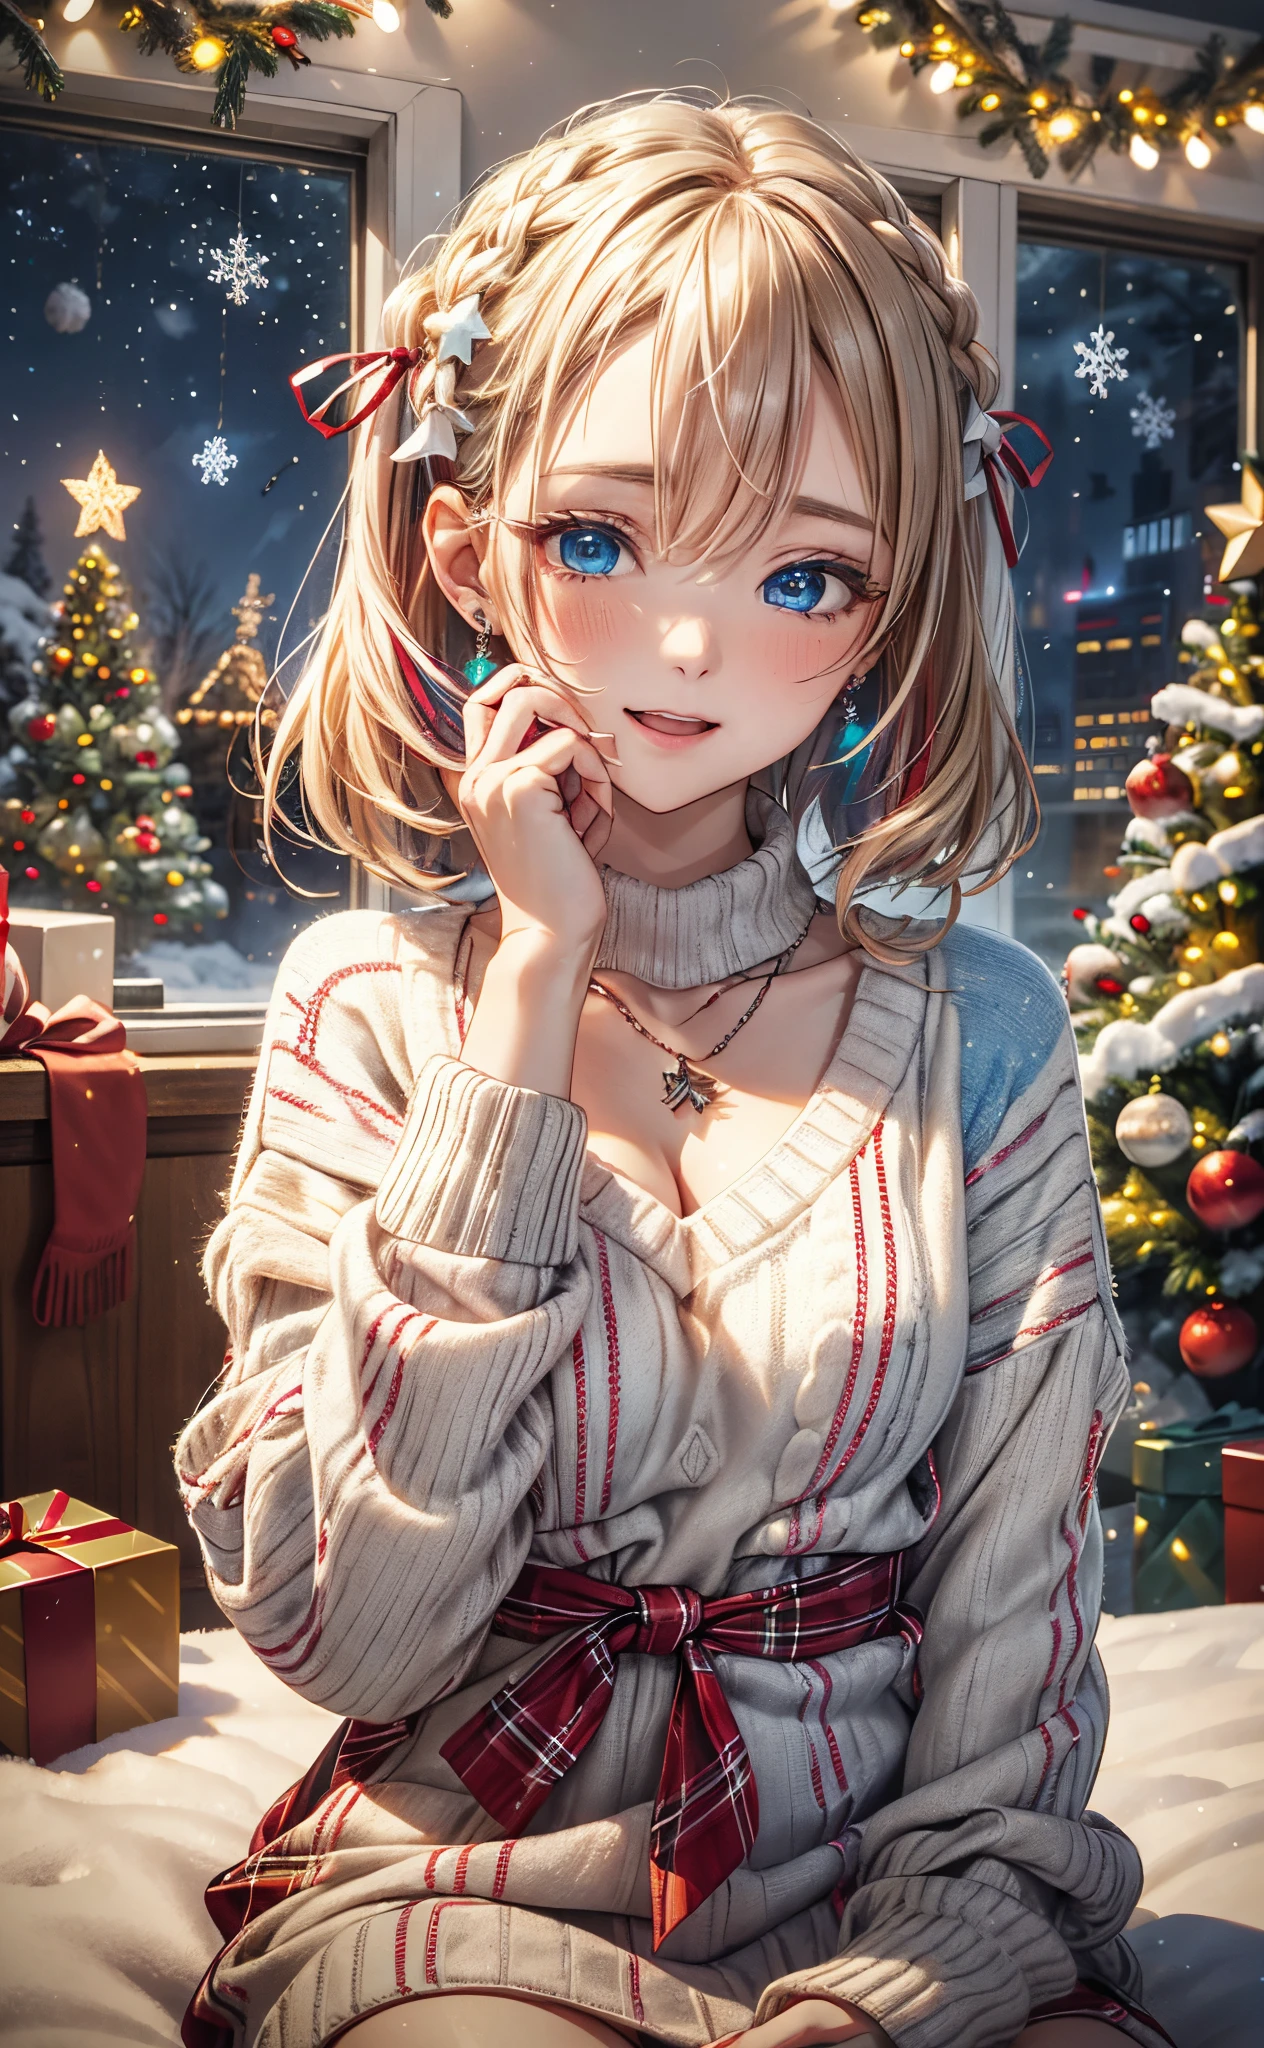 absurderes, ultra-detailliert,bright colour, Short hair,Blonde hair with fluffy short twintails:1.2) Shiny hair,(red and white plaid sweater dress:1.5),(Open mouth and laugh 1. 3),(Close one eye and feel shy:1.3),(Christmas tree:1.3),(Christmas Decorations:1.3),(colorful led lights on the wall:1.5),Delicate beautiful face, red blush、(Deep Blue Eyes:1.5), White skin, hair clips, earrings, a necklace,Heavy snow outside the window,You can also see the starry sky and the aurora borealis.......